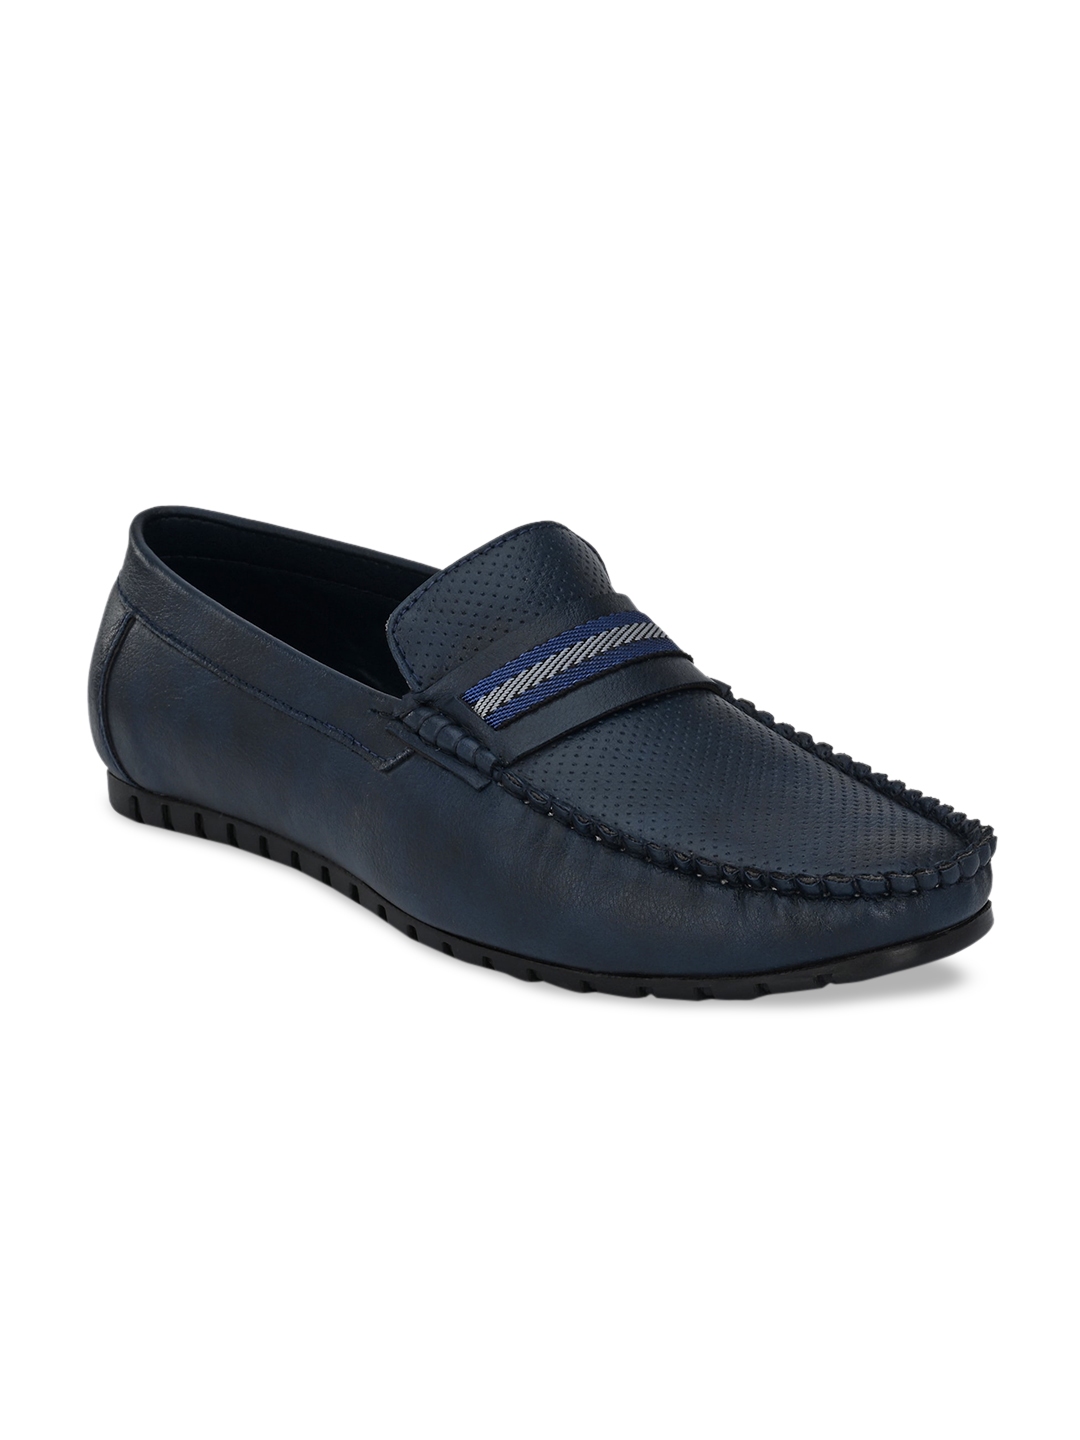 Buy Mast & Harbour Men Navy Blue Loafers - Casual Shoes for Men ...